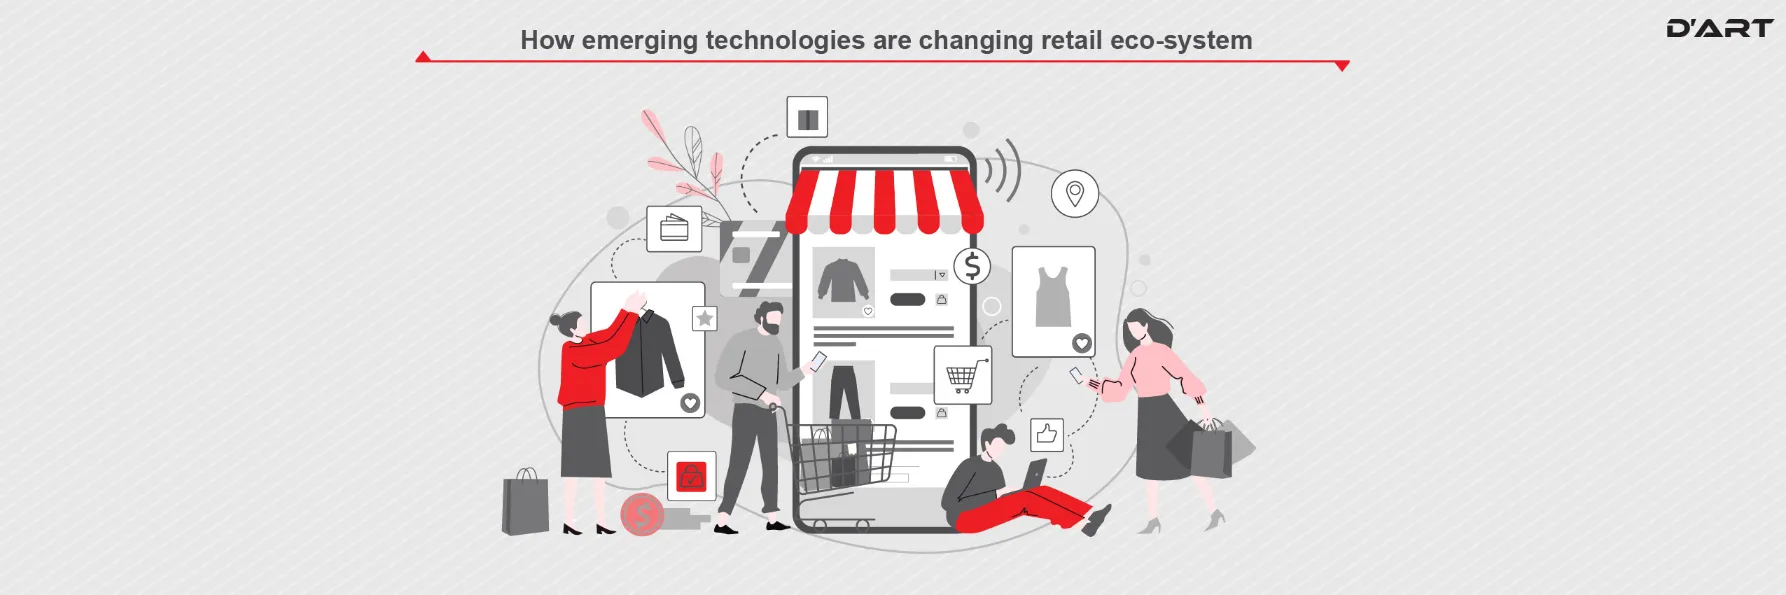 How emerging technologies are changing the retail ecosystem